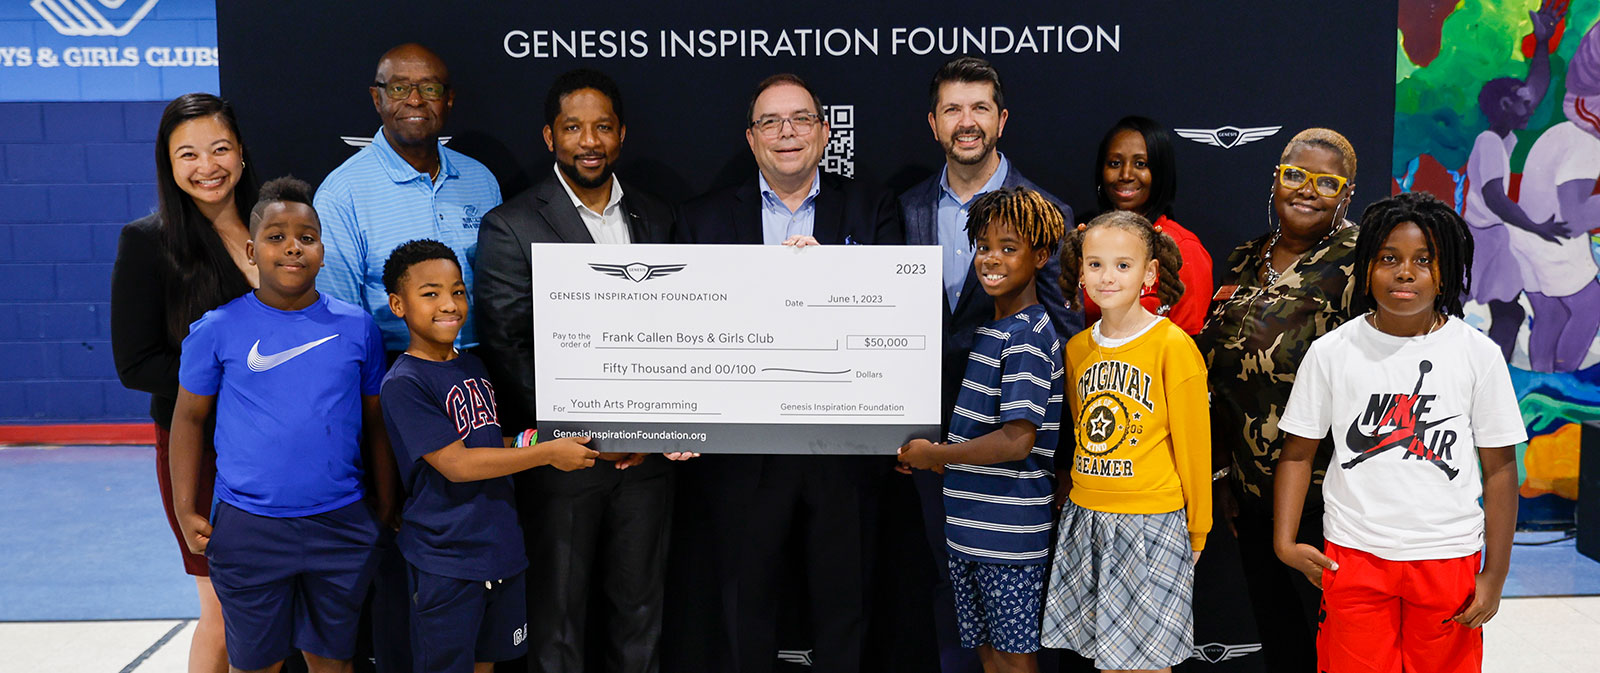 Genesis Inspiration Foundation presents Frank Callen Boys & Girls Club with a donation in support of arts education in Savanna, Ga. on June 1, 2023. (Photo/Genesis)